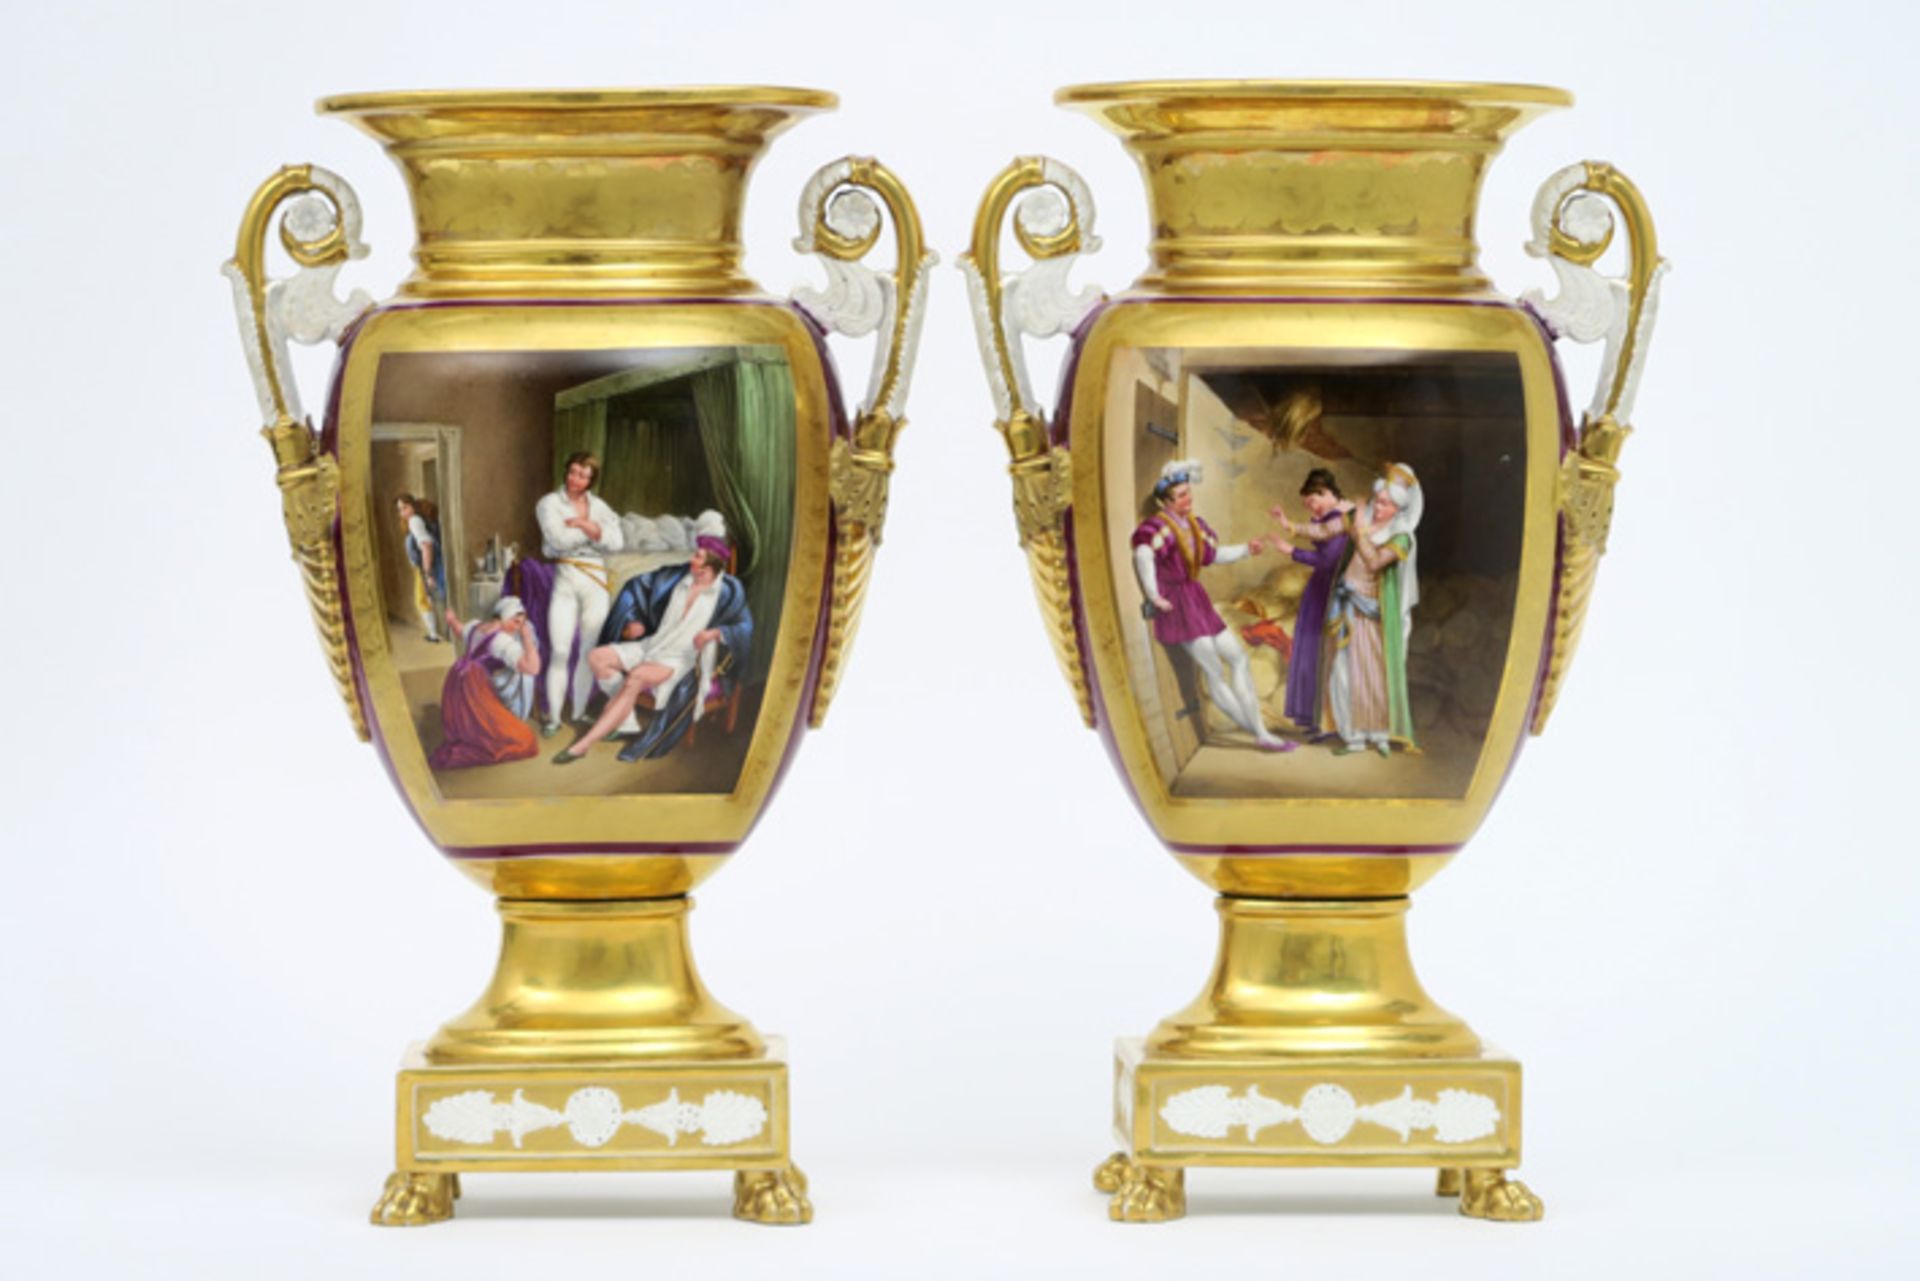 pair of antique Empire style vases in porcelain from Paris with finely painted decors||Paar antieke 